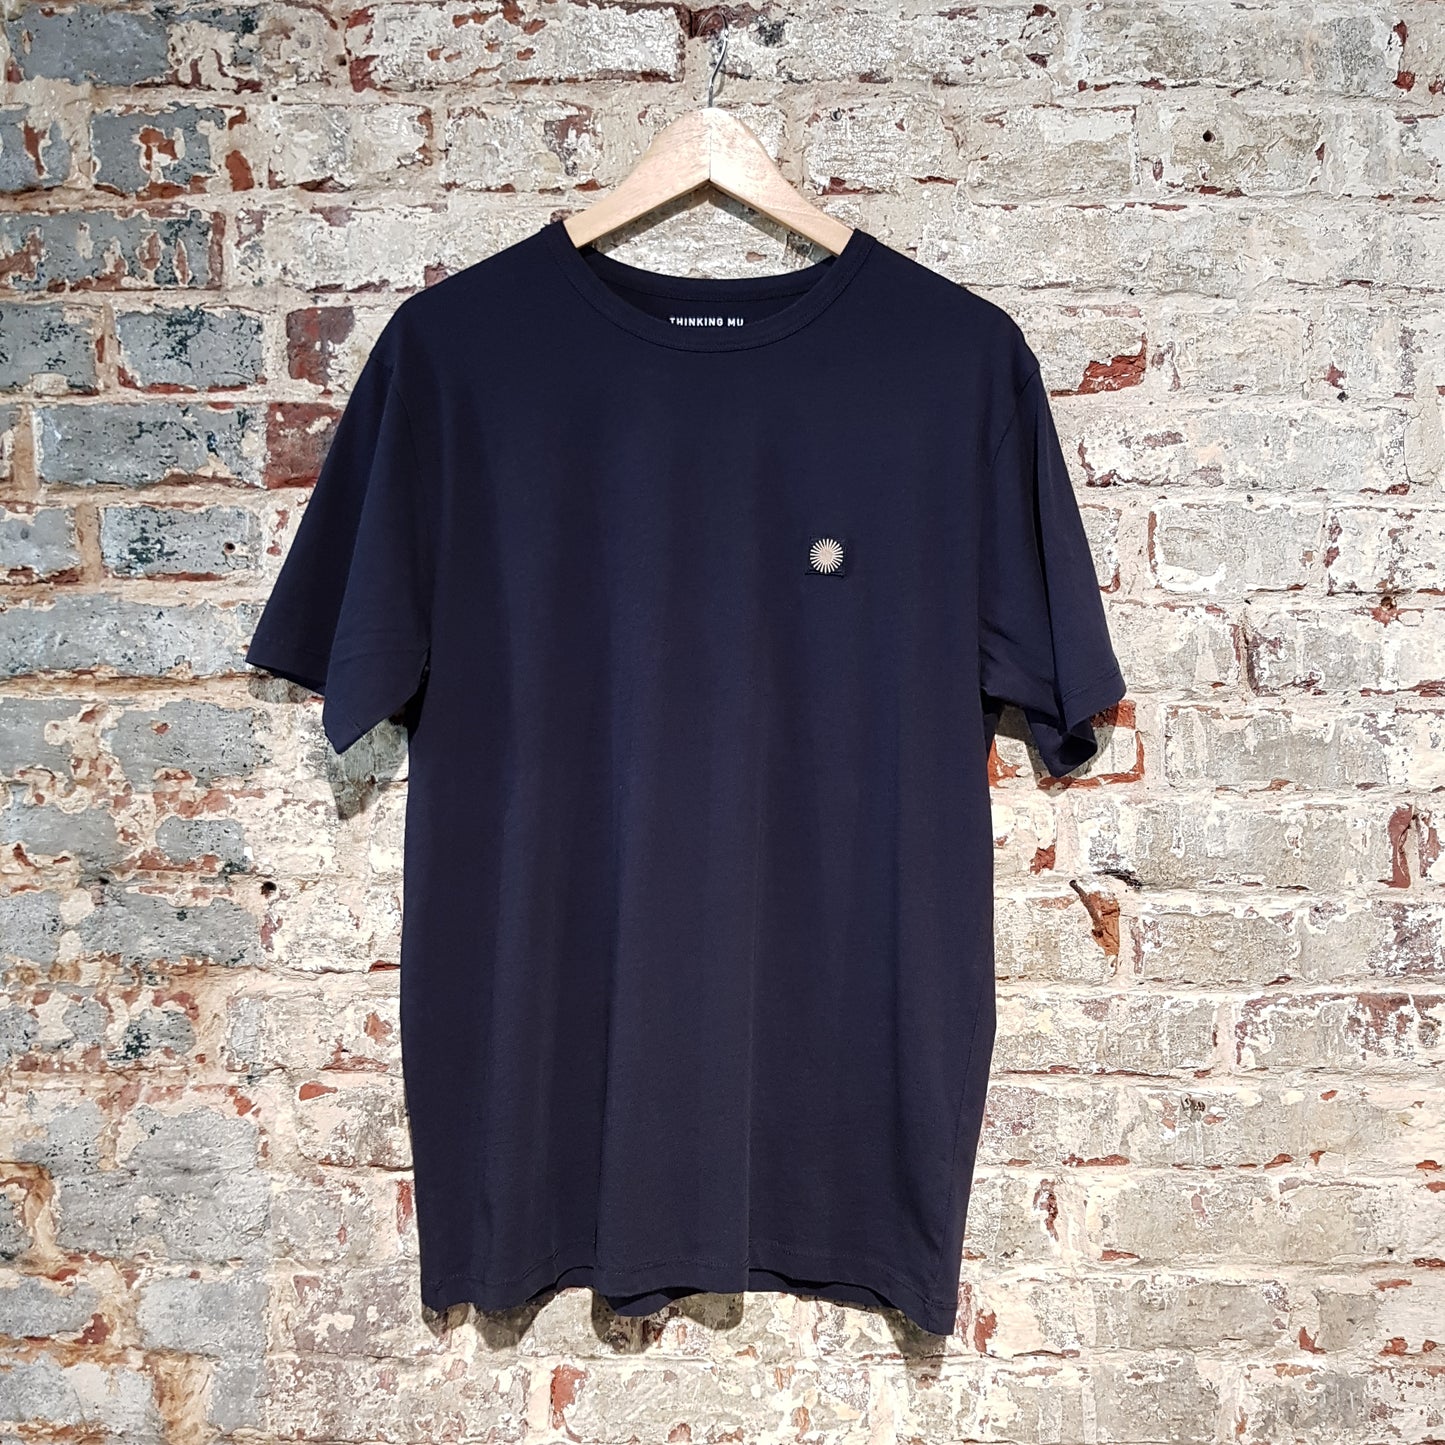 Curry Sol T-Shirt - Navy